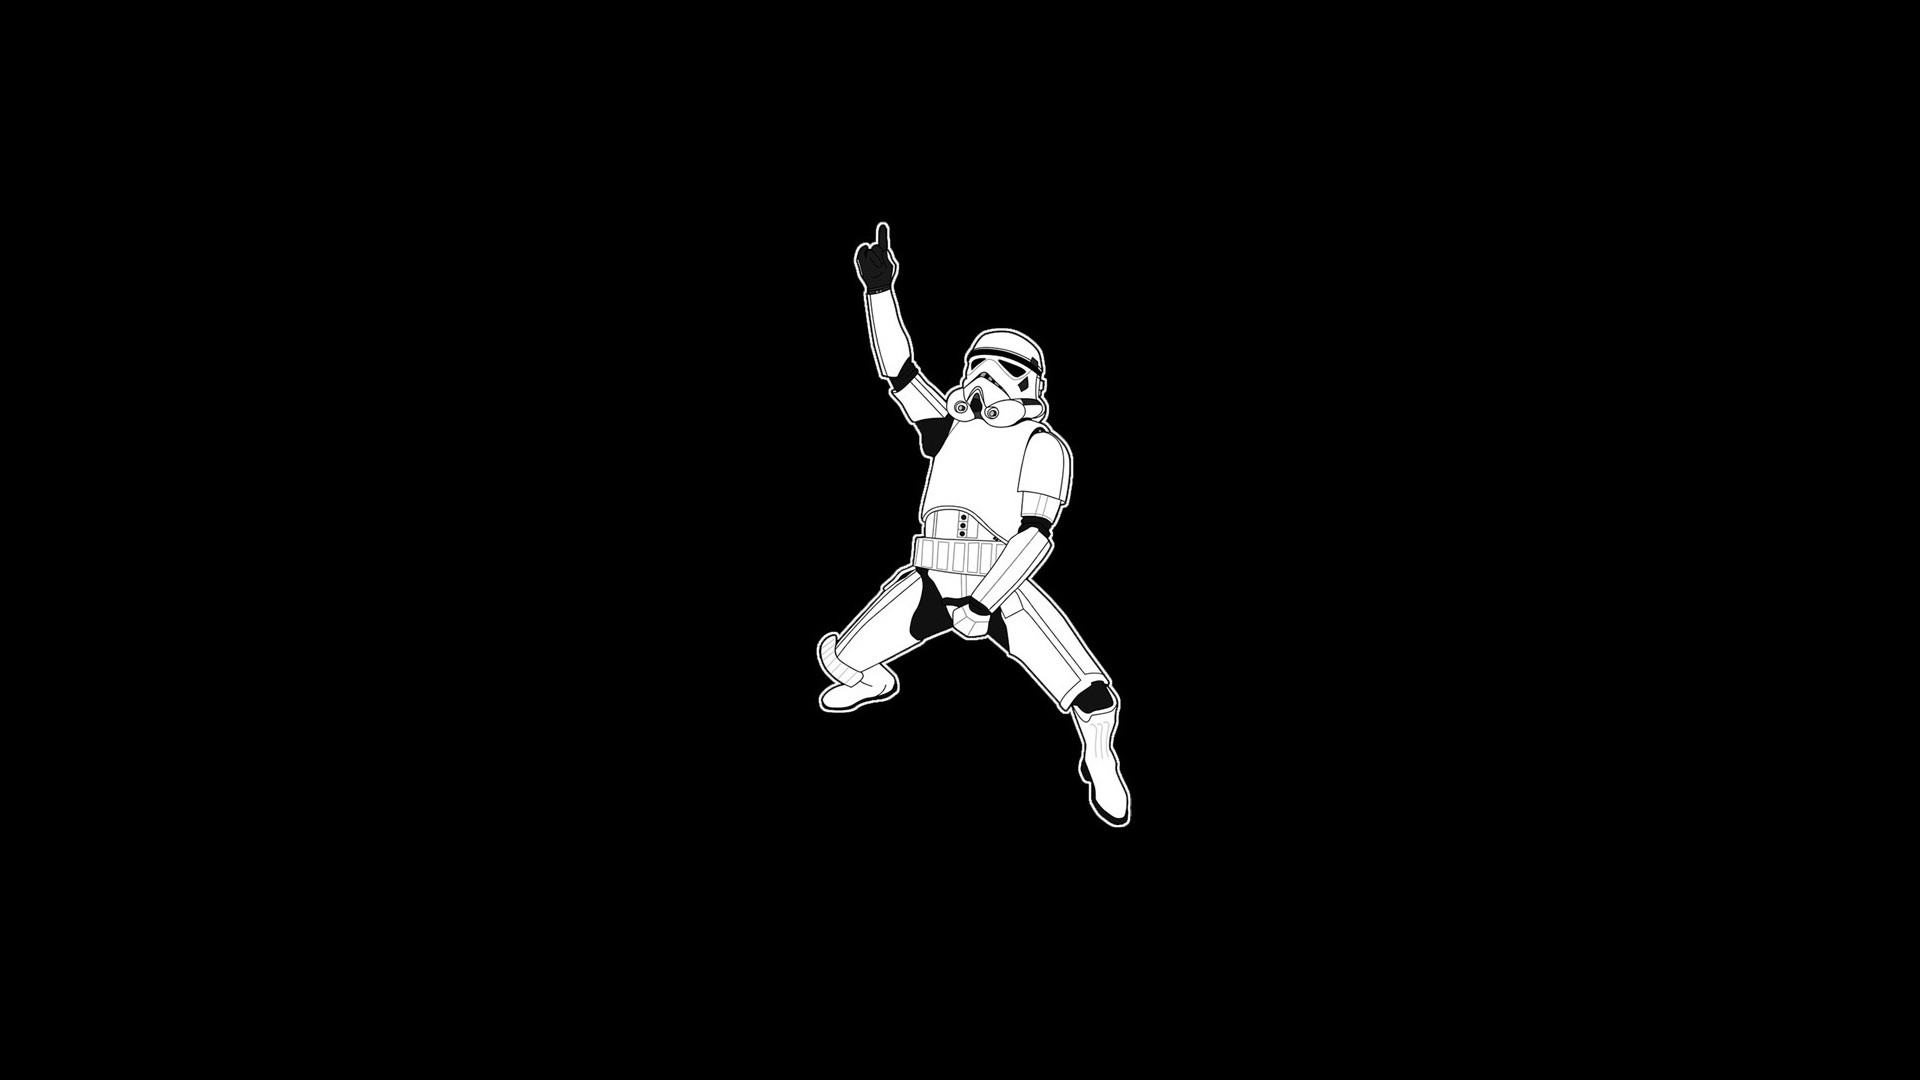 1920x1080 Stormtrooper--Need-iPhone-S-Plus-Background-for-